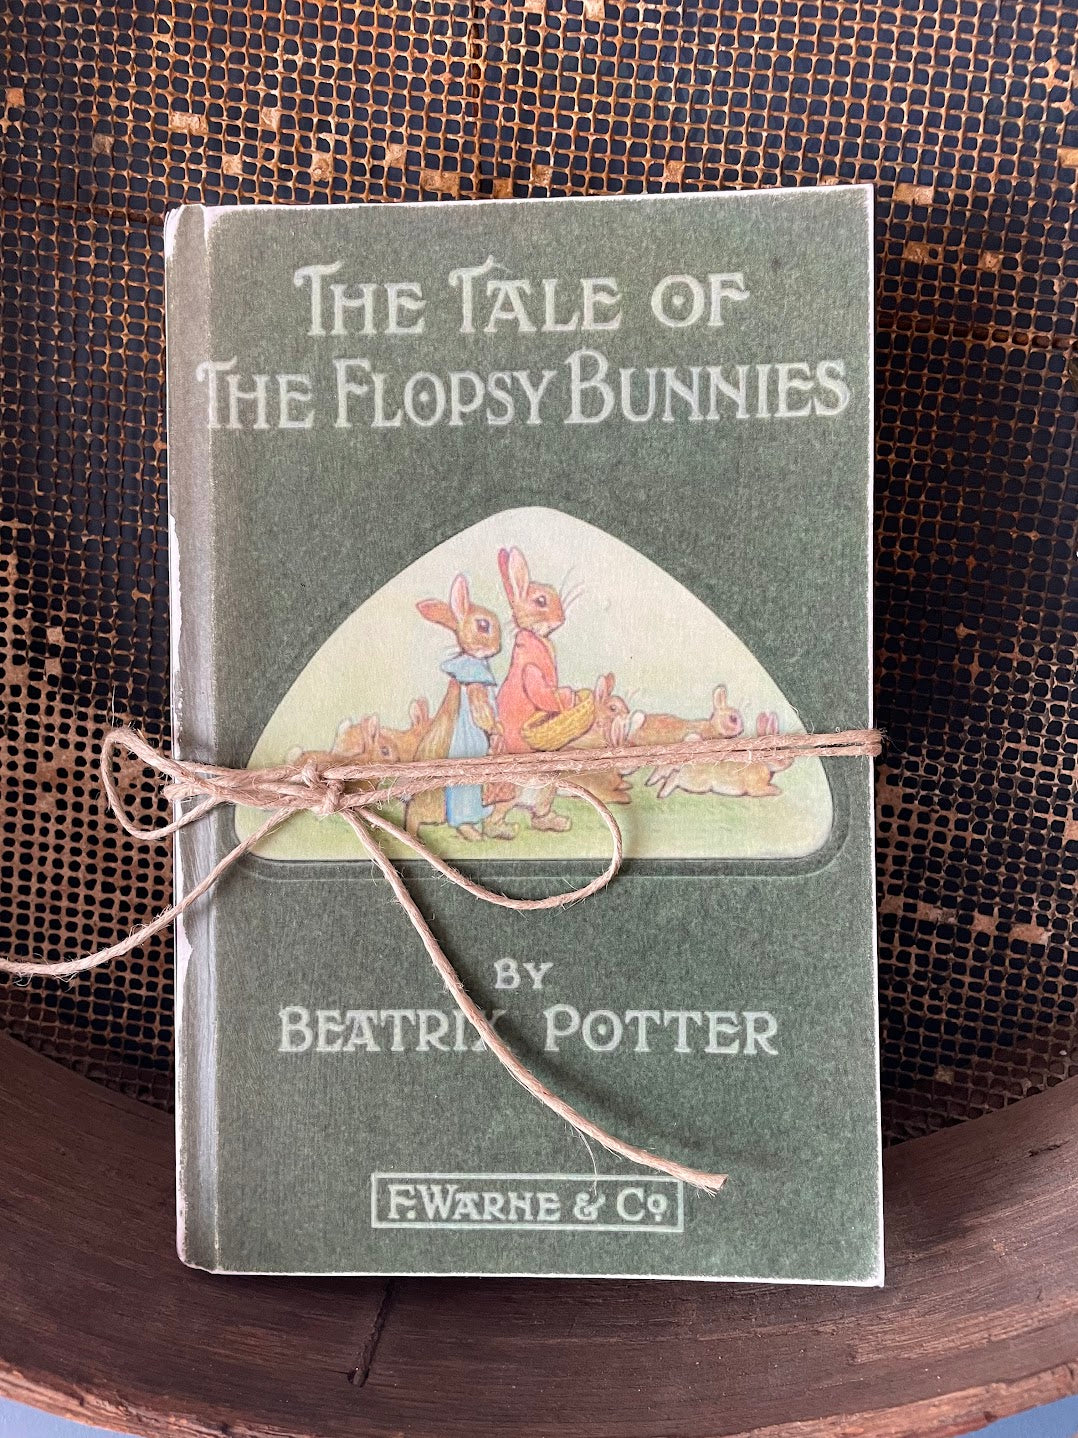 Spring Easter Handcrafted Vintage Look Tale Of The Flopsy Bunnies Beatrix Potter Book